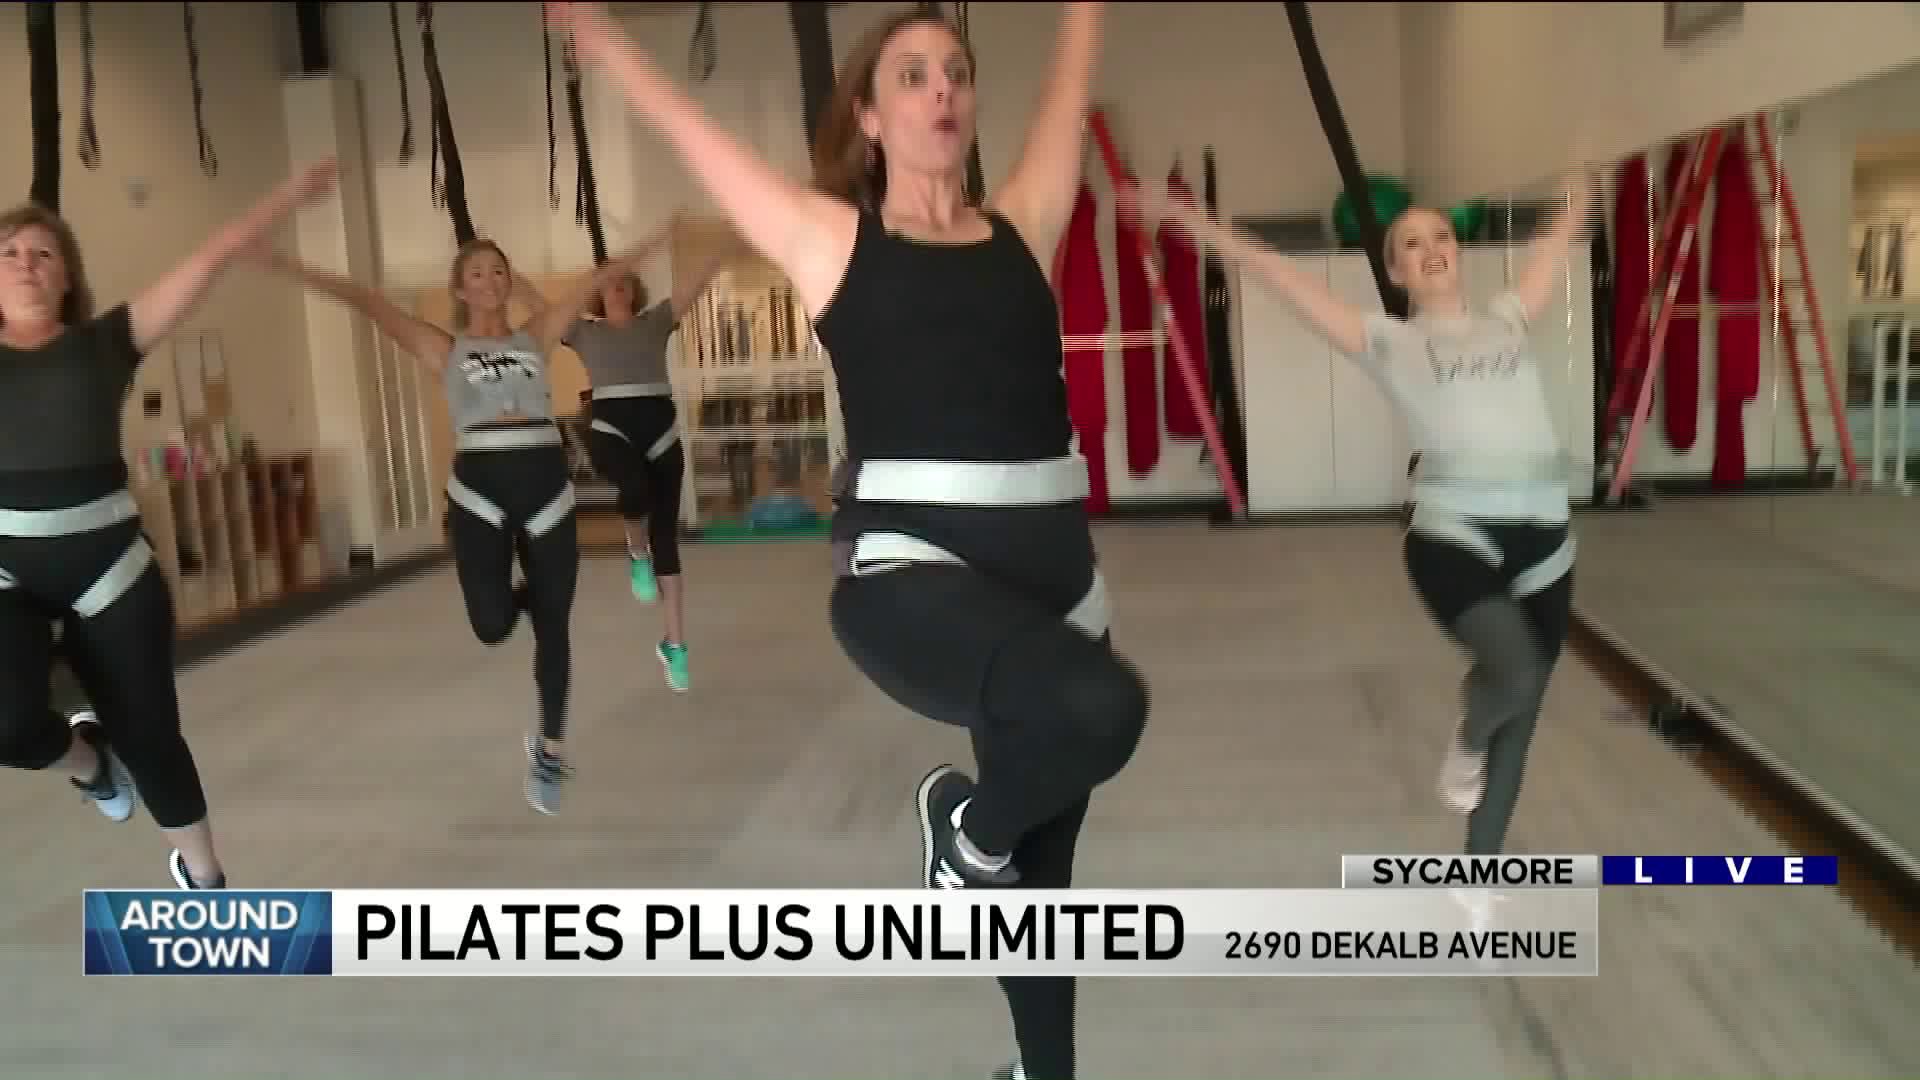 Around Town checks out a bungee exercise at Pilates Plus Unlimited